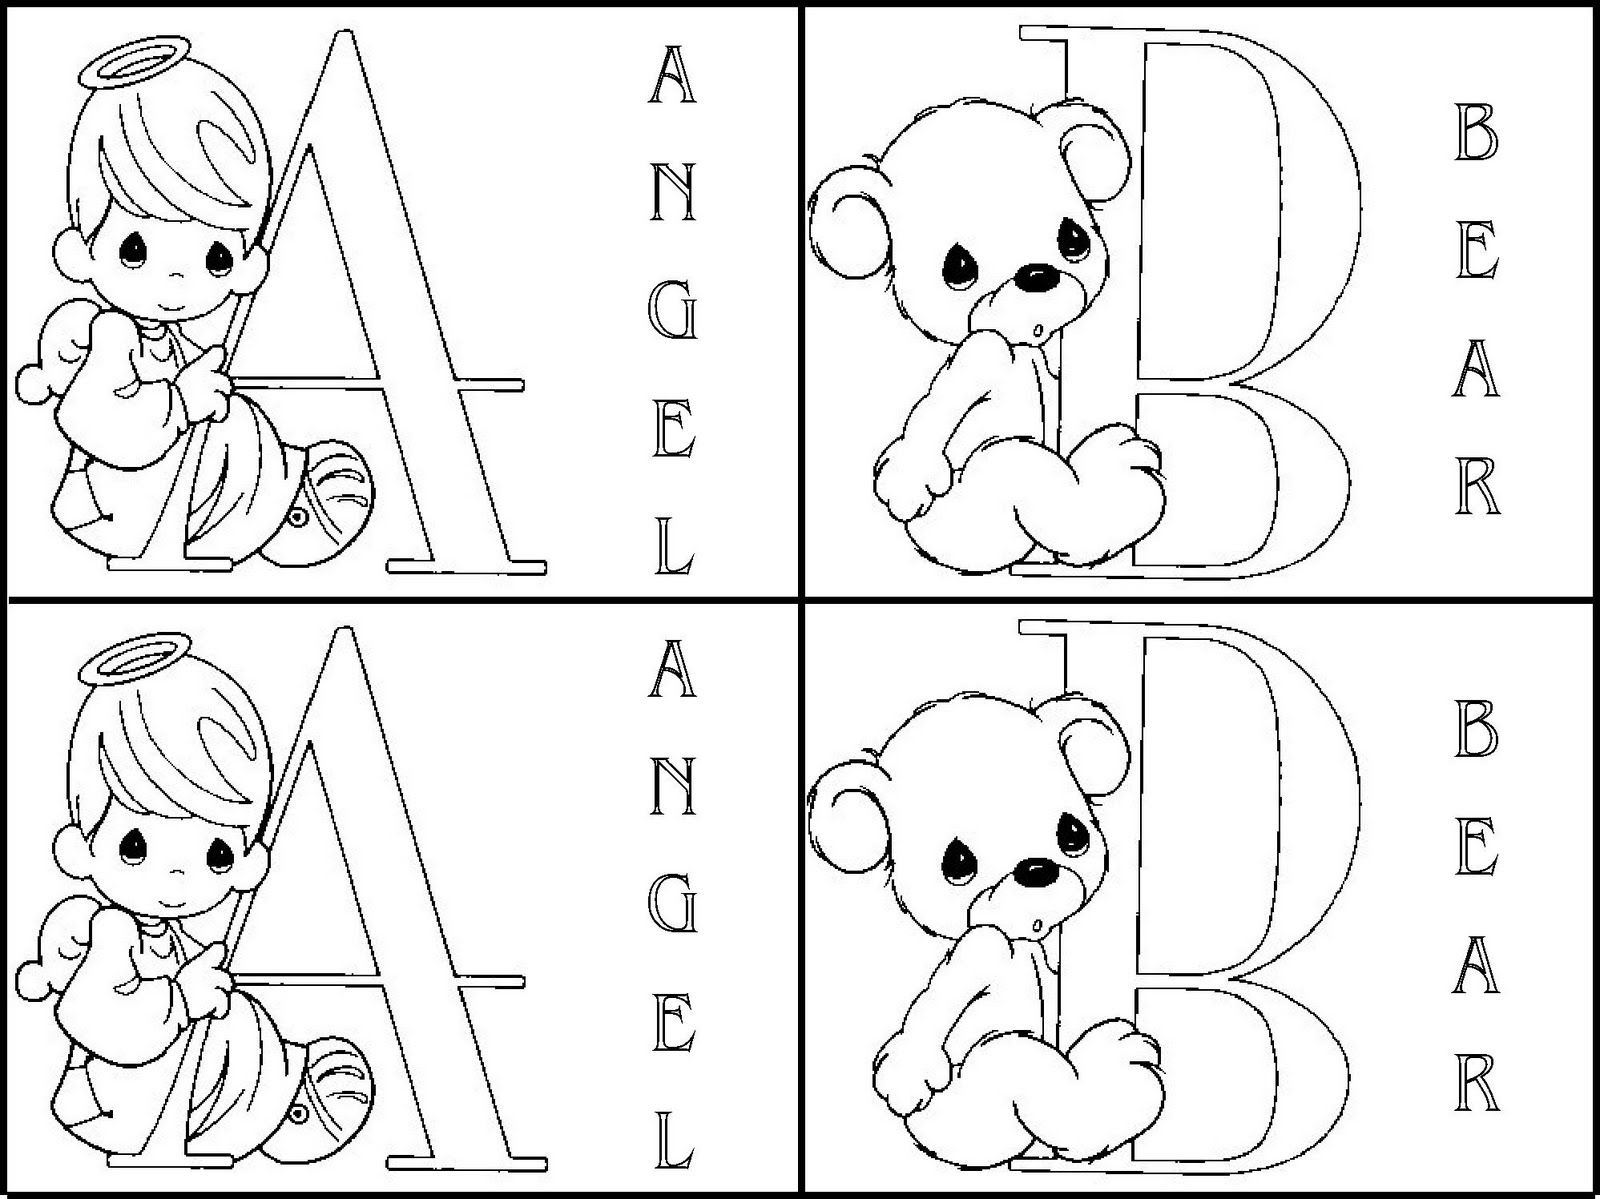 A B Coloring Pages - Coloring Pages For All Ages